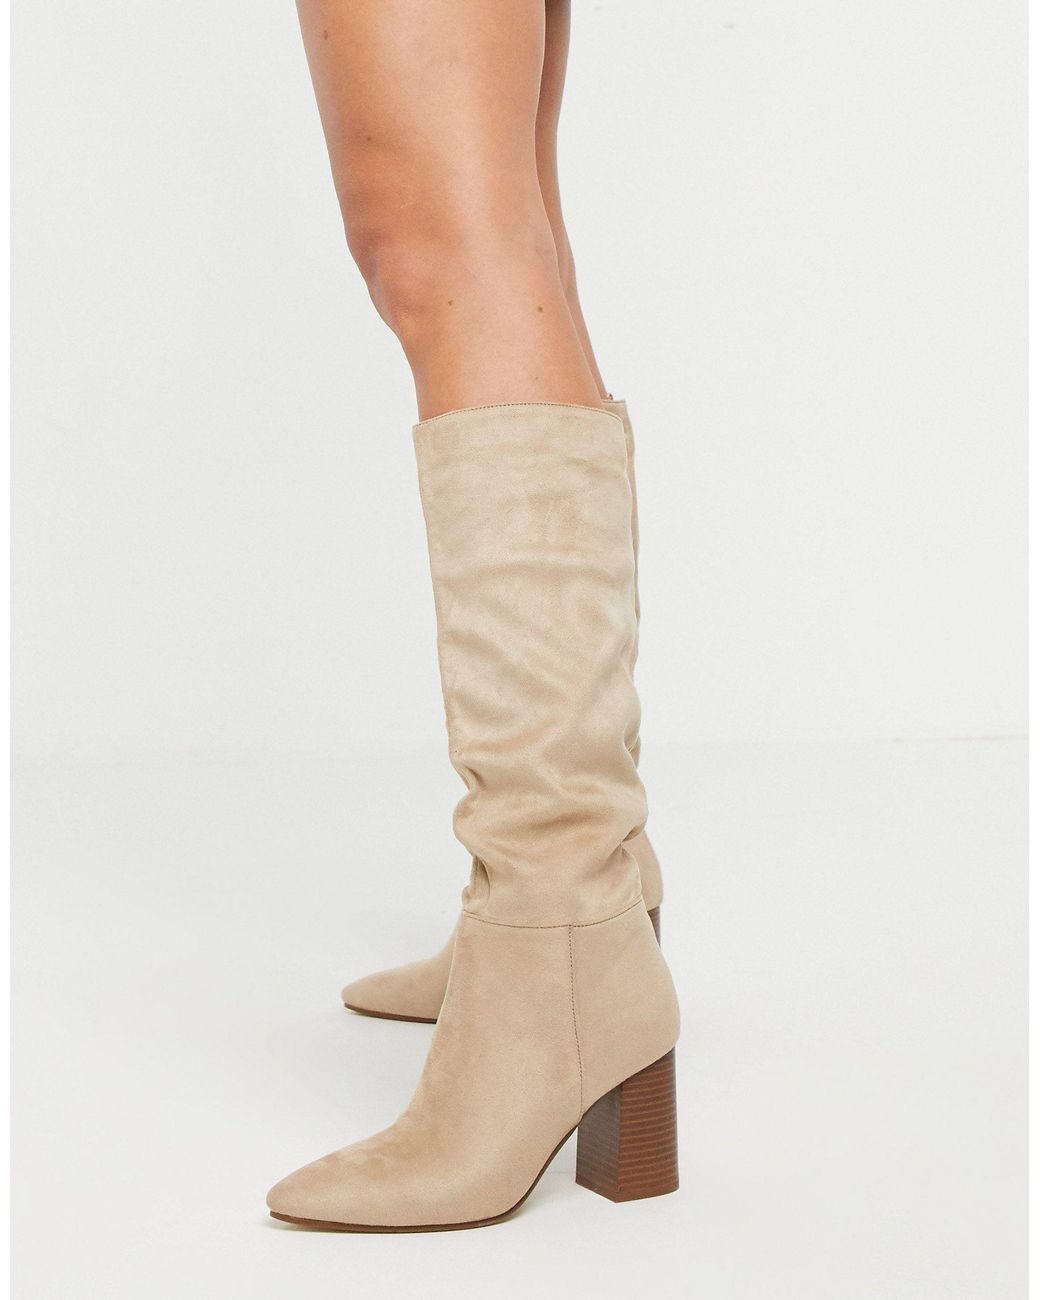 Pimkie Knee High Slouch Boots in Natural | Lyst Australia